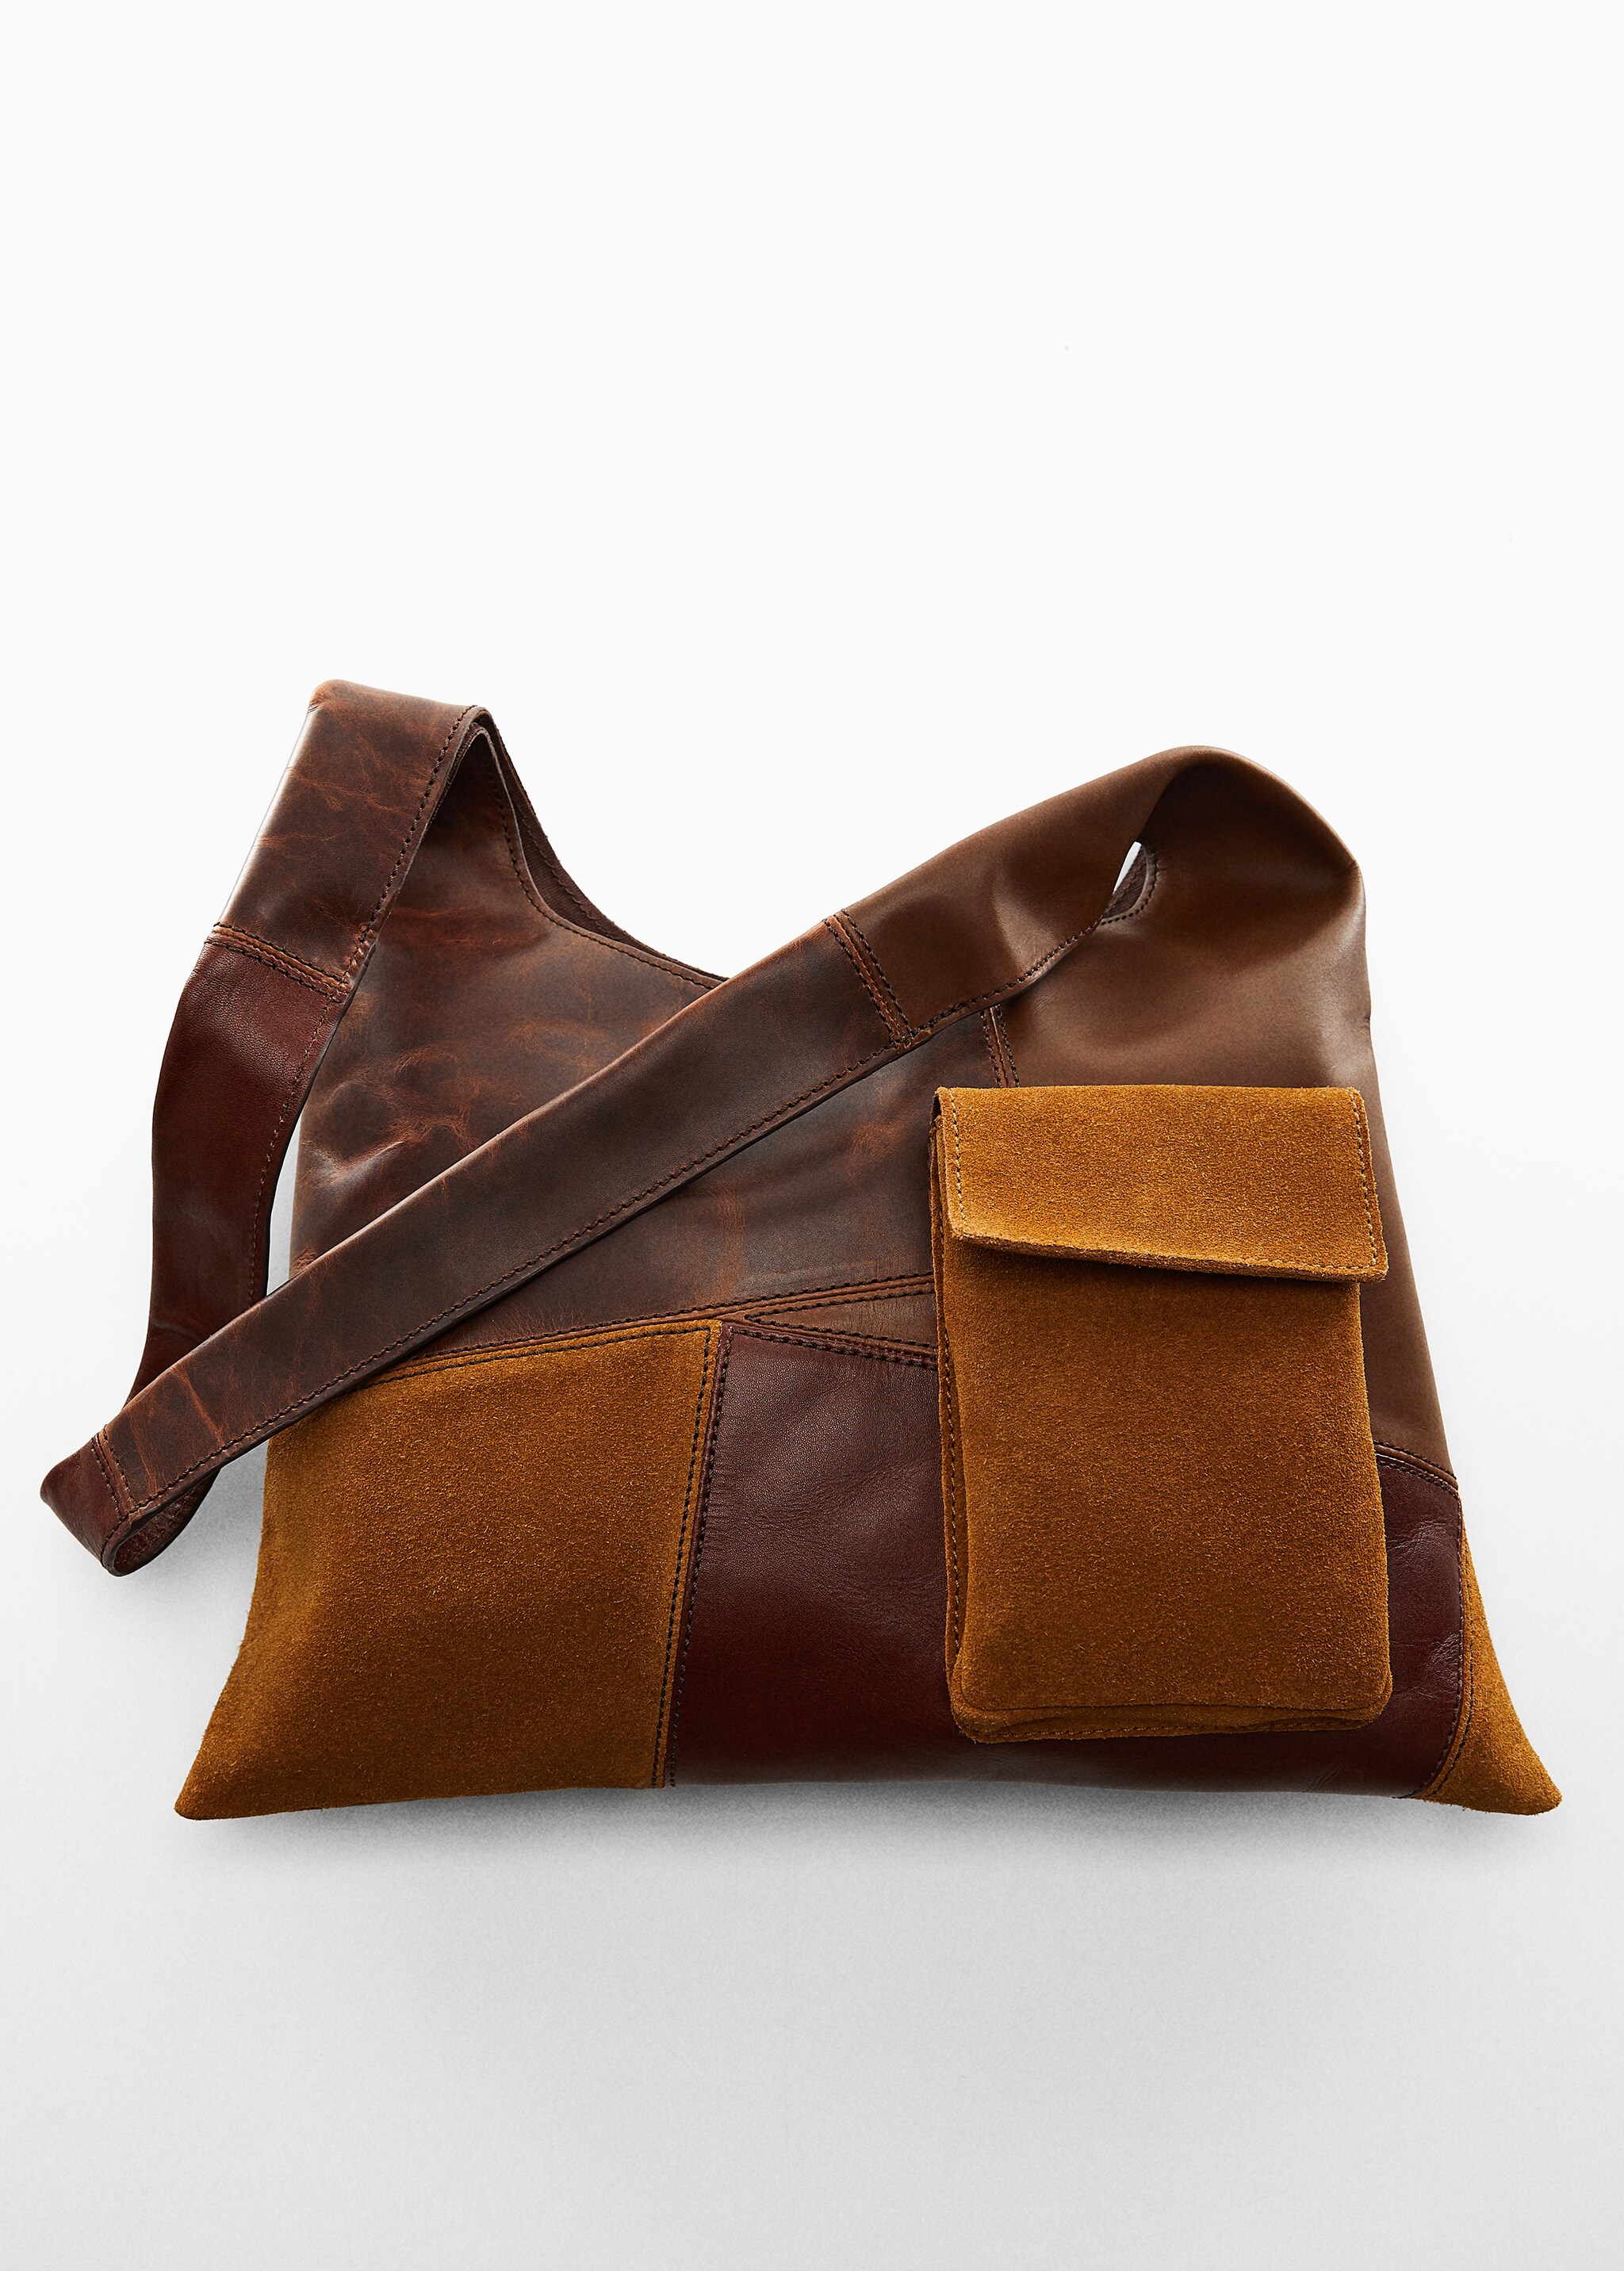 Patchwork leather bag - Details of the article 5